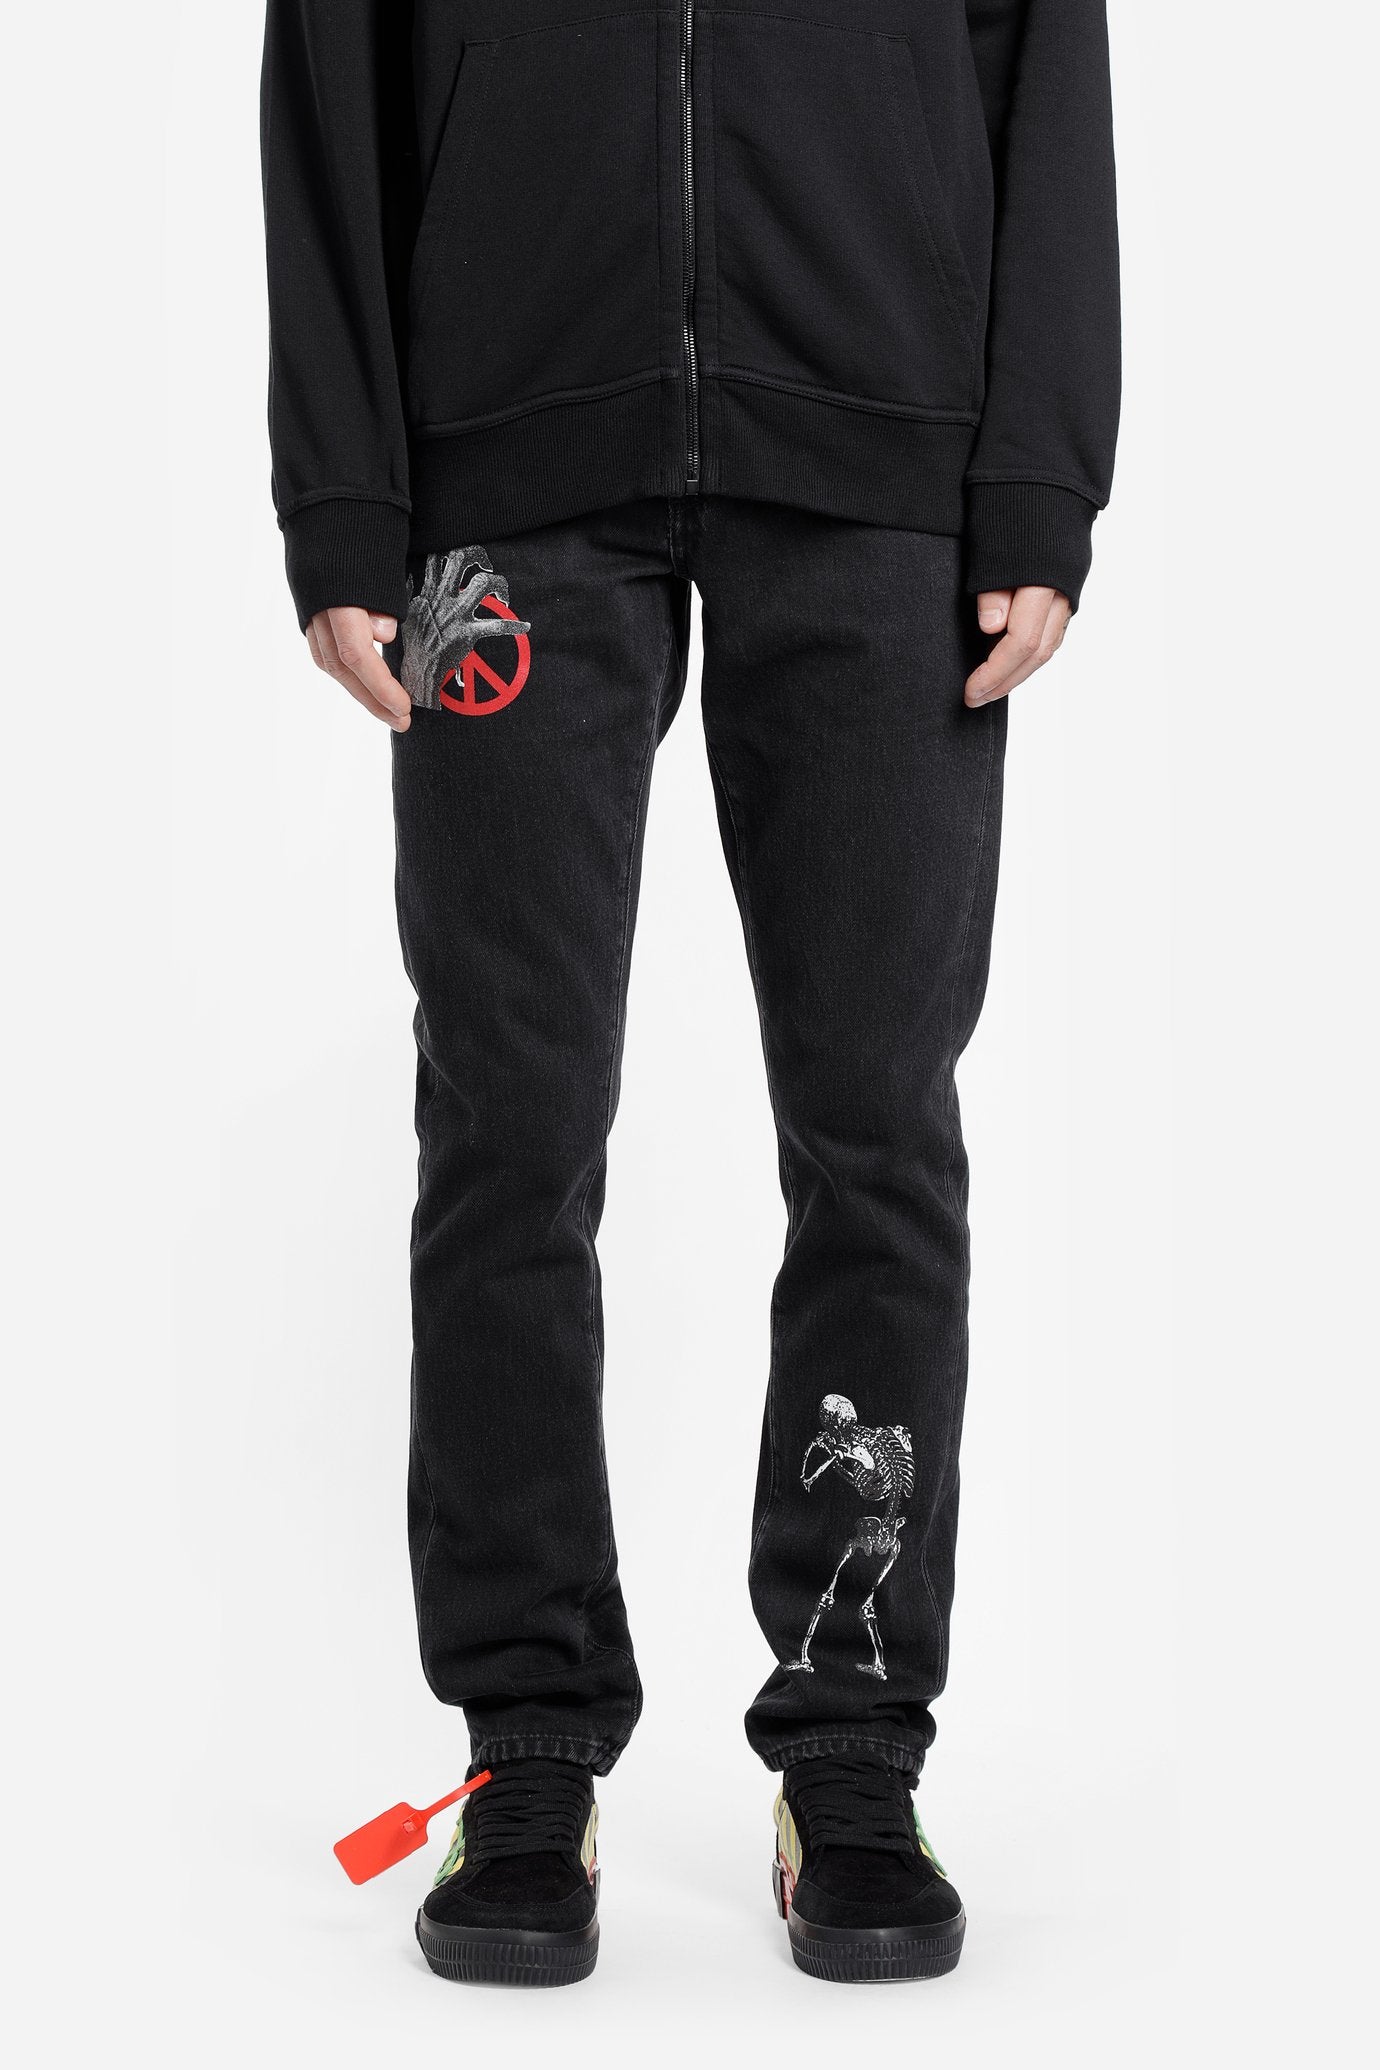 OFF-WHITE VIRGIL ABLOH X UNDERCOVER JEANS